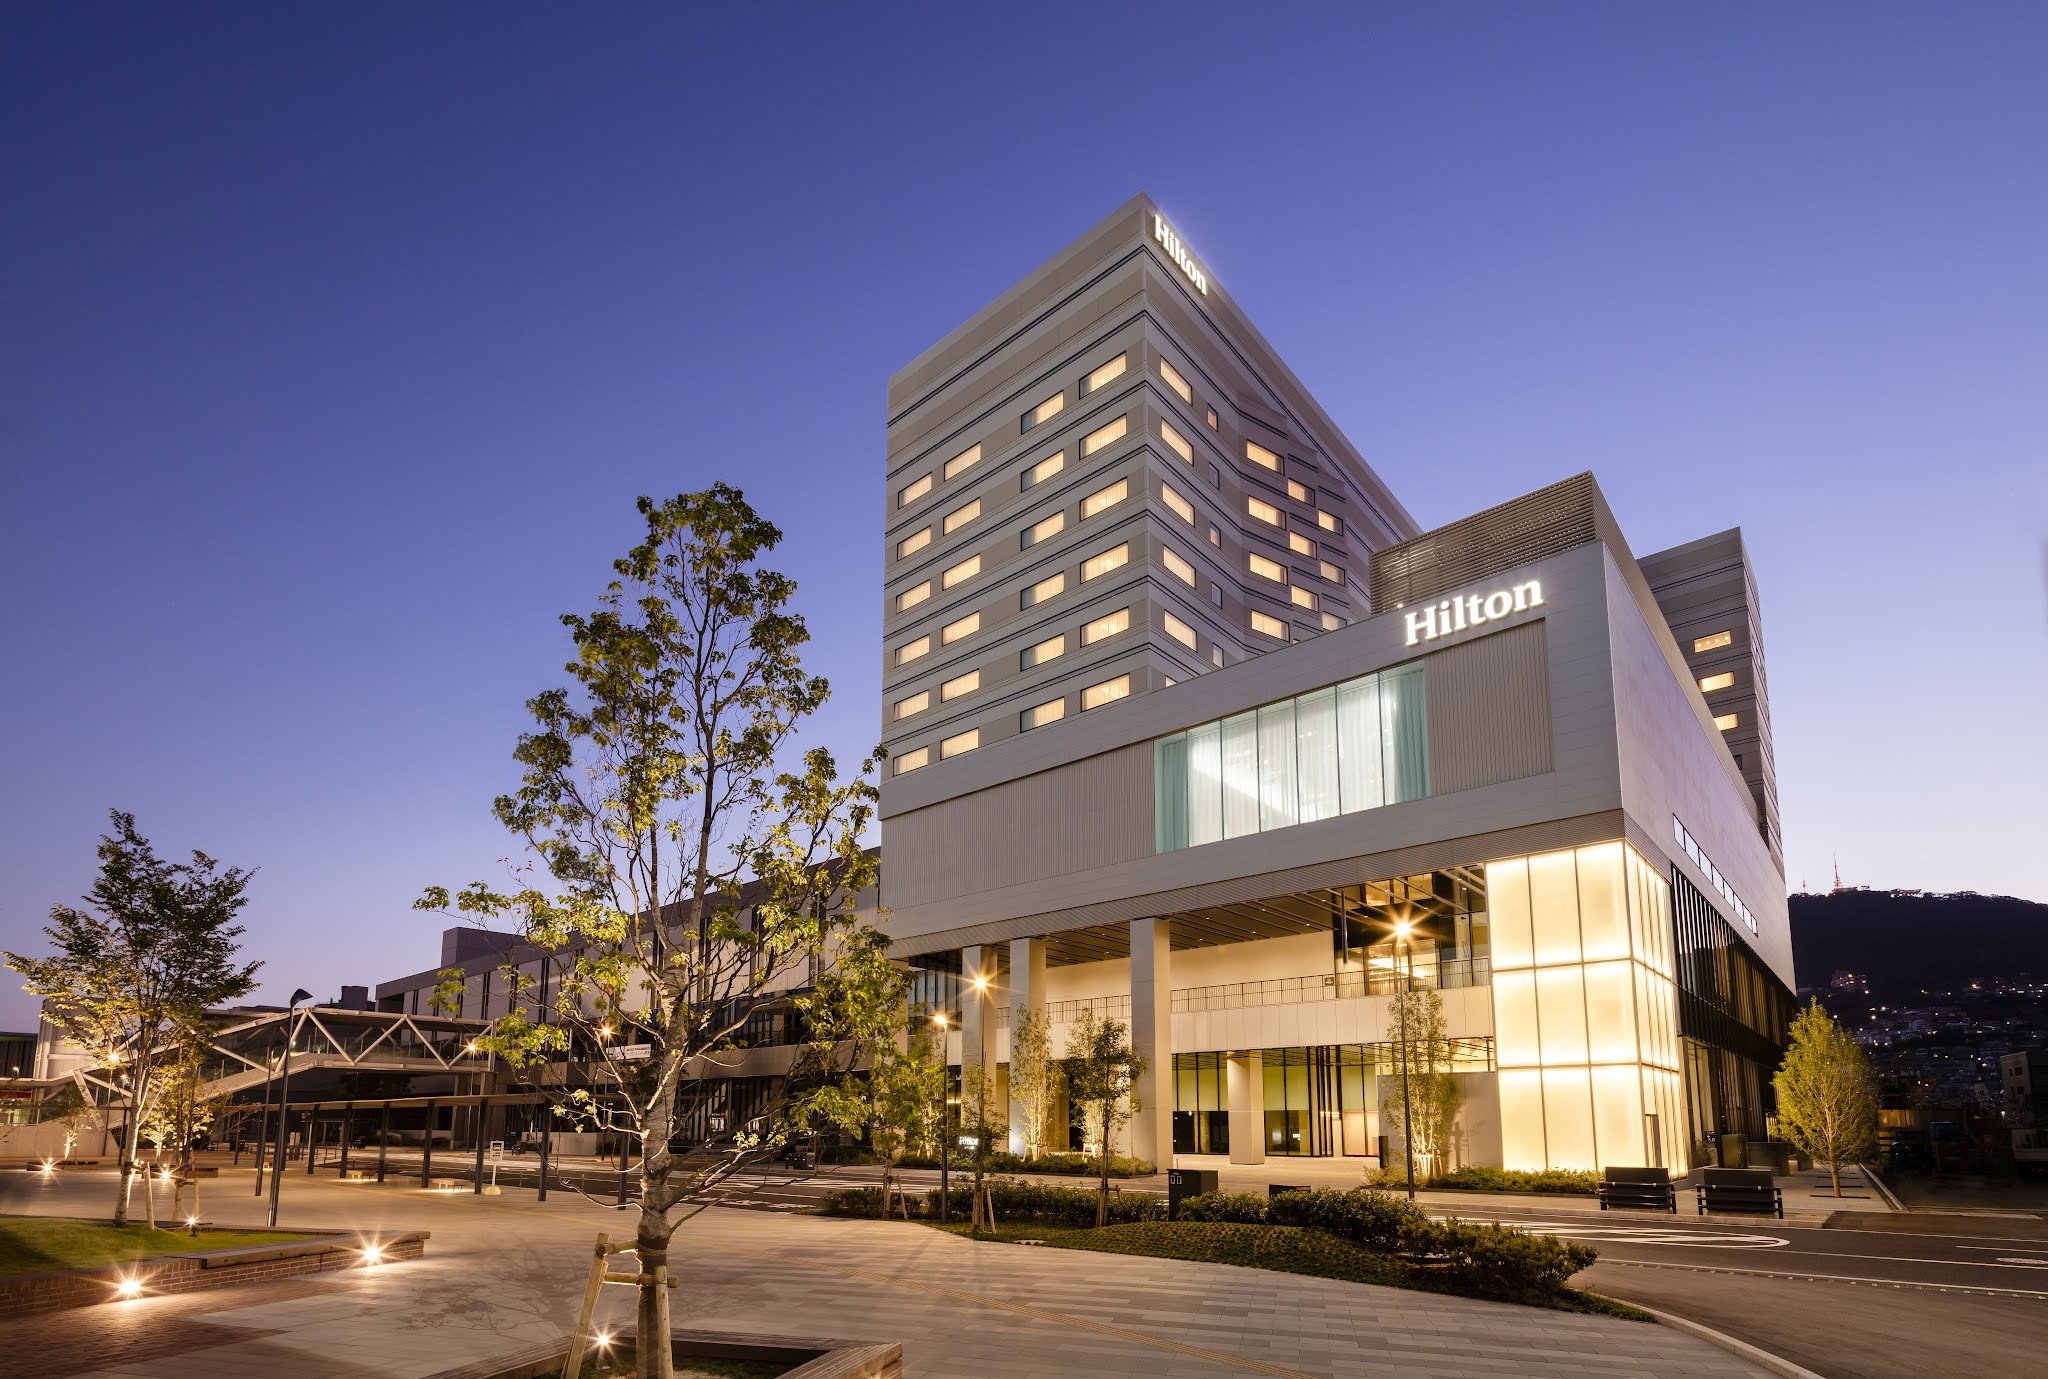 The 200-room hotel offers convenient access to new large-scale convention center and popular sightseeing spots in the city